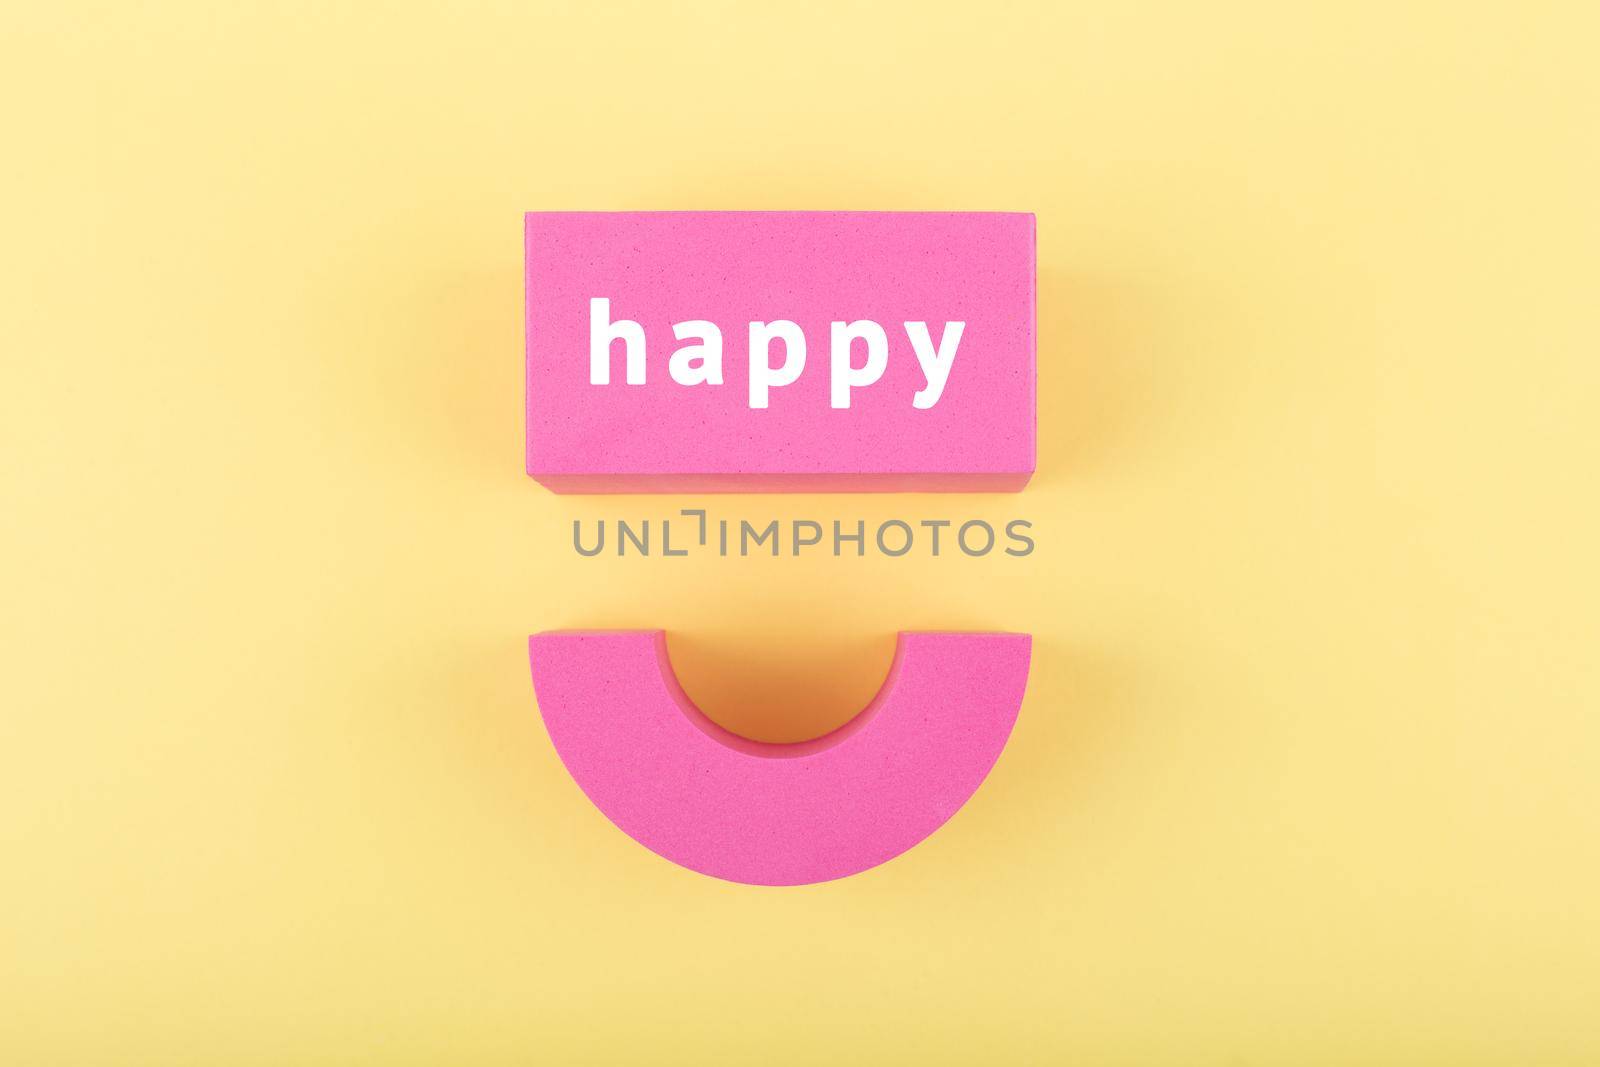 Creative flat lay with pink happy smile symbol made of toy figures on bright yellow background. Concept of Smile day, emotions, emoji or mental health